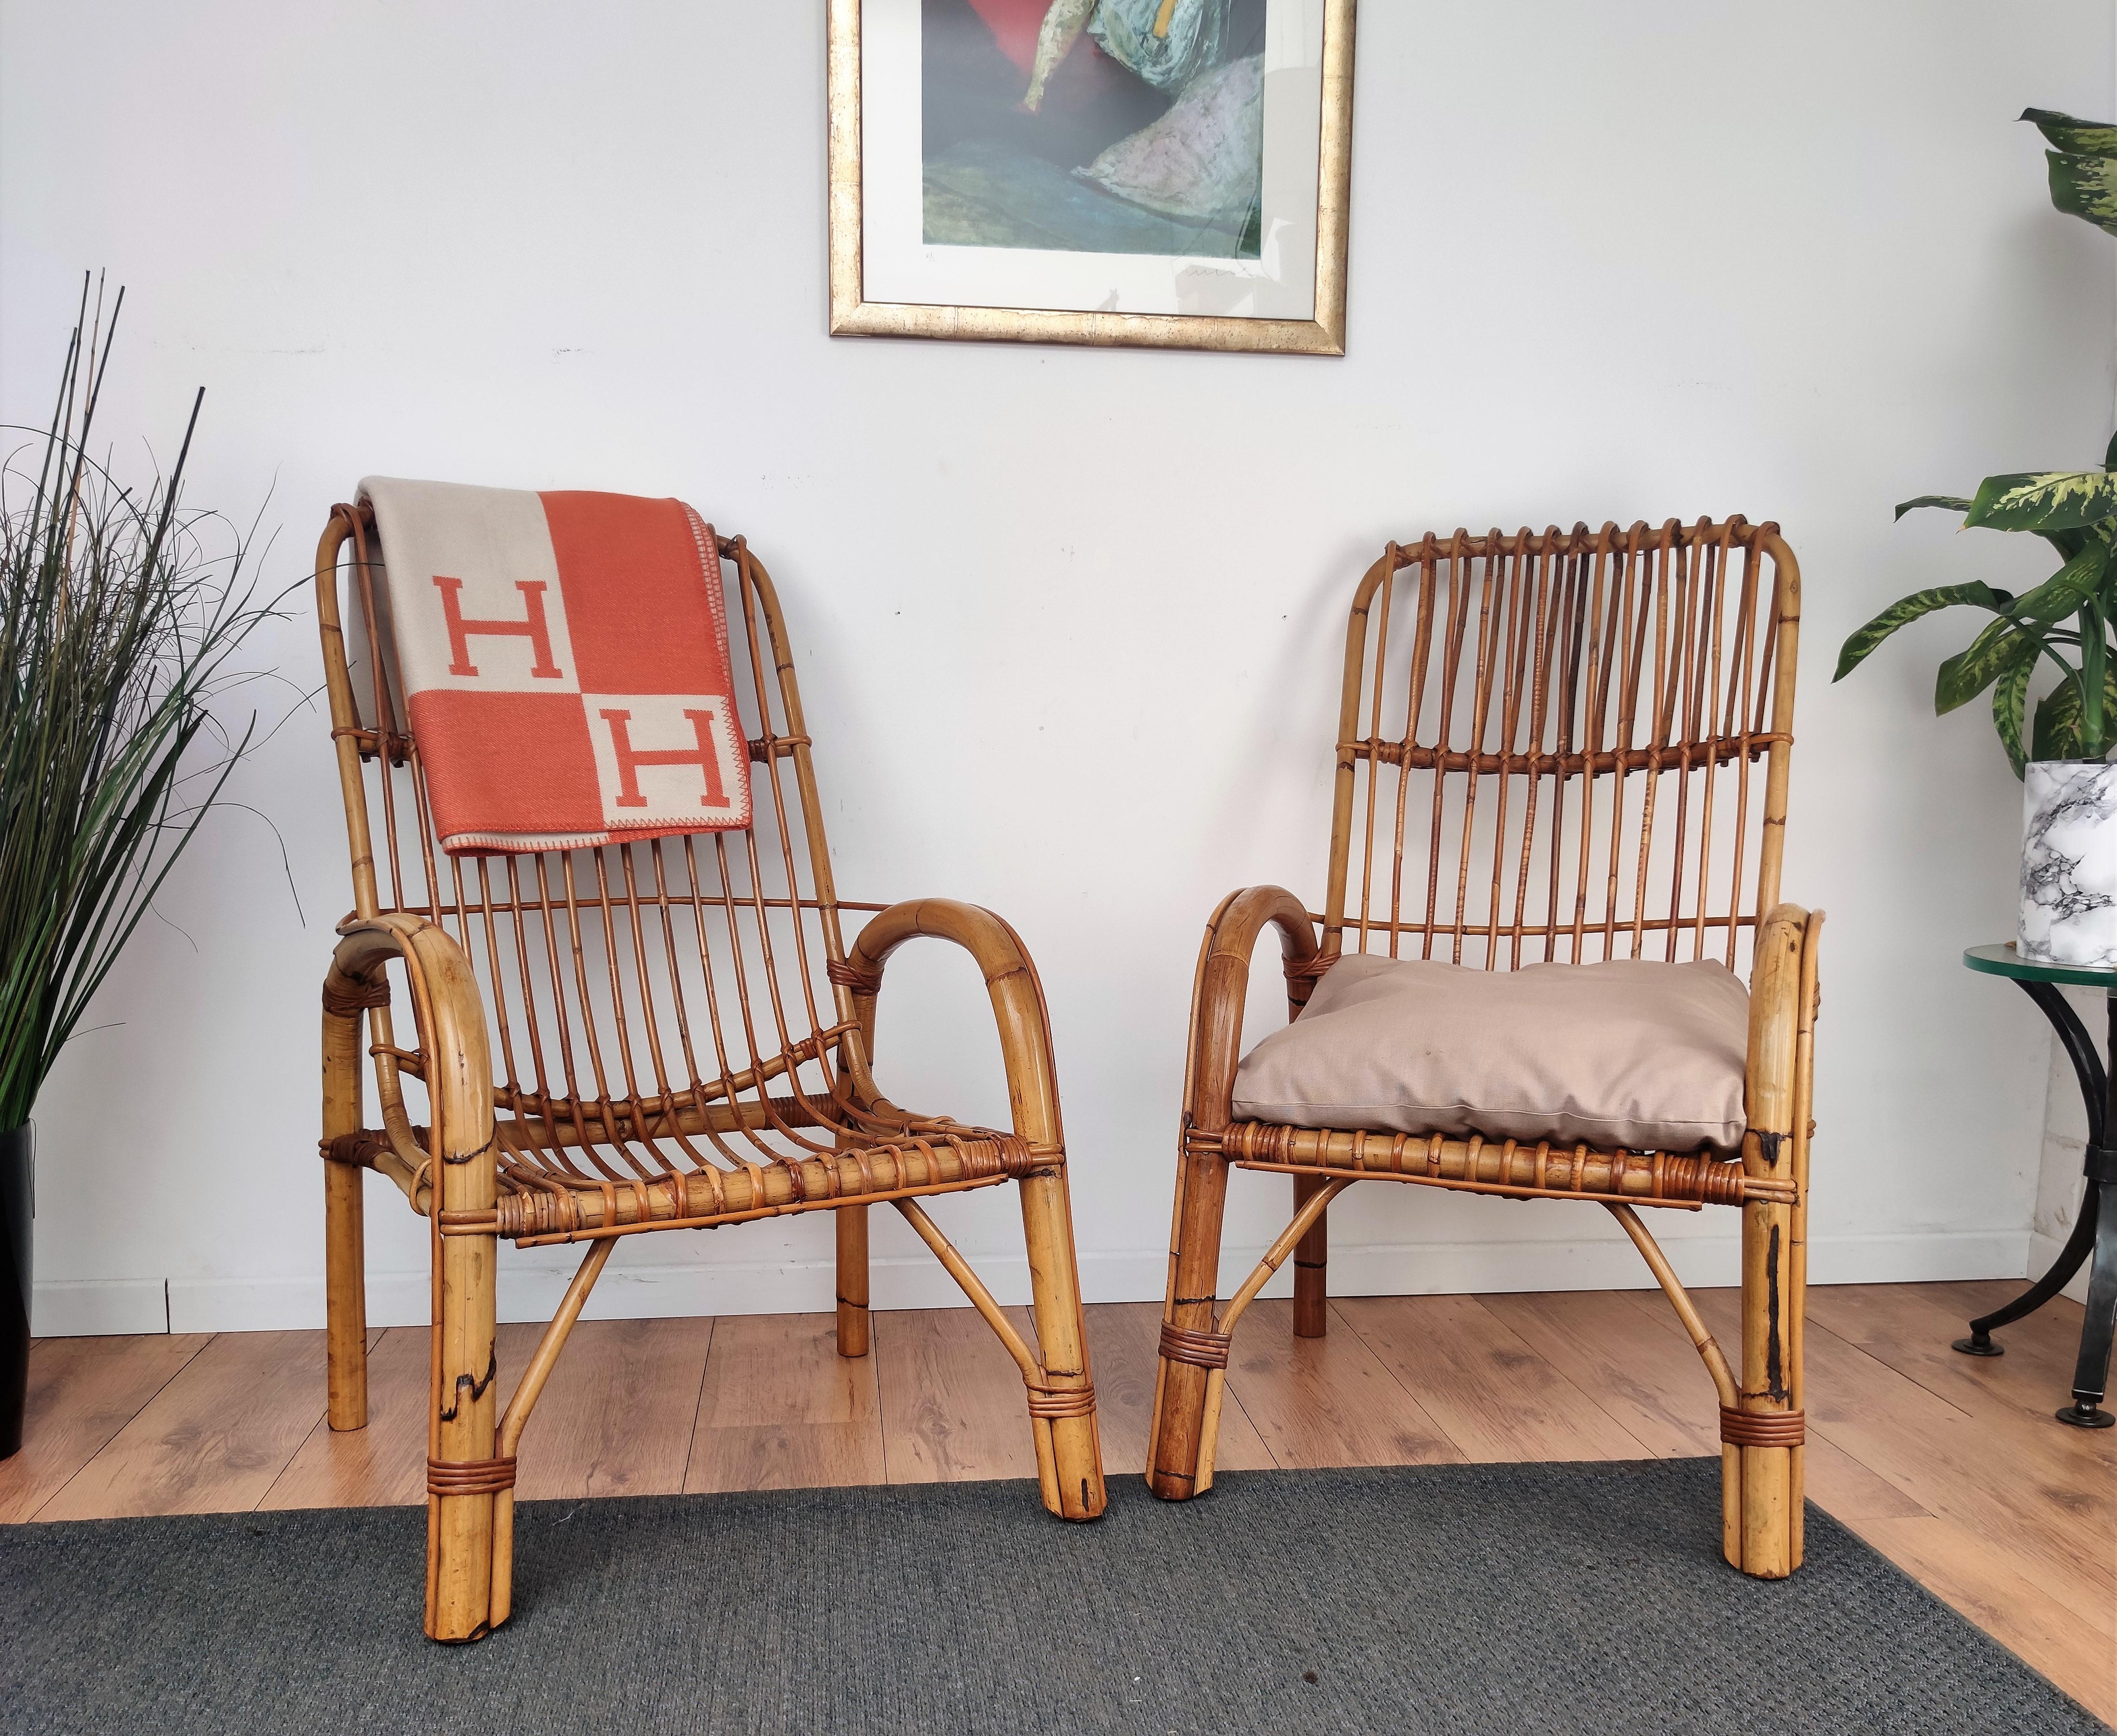 Beautiful 1960s Italian Mid-Century Modern pair of armchairs in rattan wicker bamboo with great design and tall high back. This charming lounge chairs are in the typical style of Franco Albini and Adrien Audoux where the organic beauty of the woven